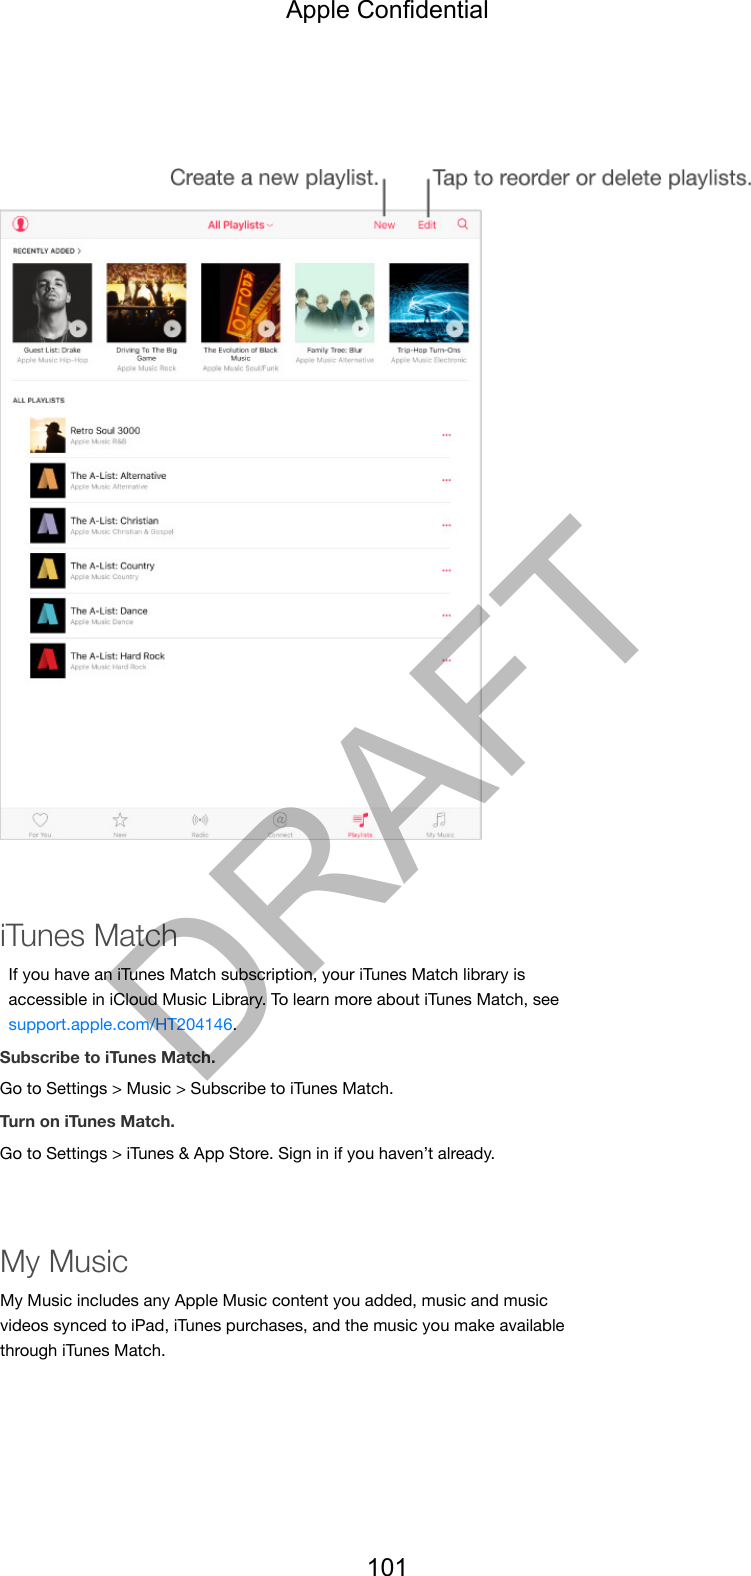 iTunes MatchIf you have an iTunes Match subscription, your iTunes Match library isaccessible in iCloud Music Library. To learn more about iTunes Match, seesupport.apple.com/HT204146.Subscribe to iTunes Match.Go to Settings &gt; Music &gt; Subscribe to iTunes Match.Turn on iTunes Match.Go to Settings &gt; iTunes &amp; App Store. Sign in if you haven’t already.My MusicMy Music includes any Apple Music content you added, music and musicvideos synced to iPad, iTunes purchases, and the music you make availablethrough iTunes Match.Apple Confidential101DRAFT